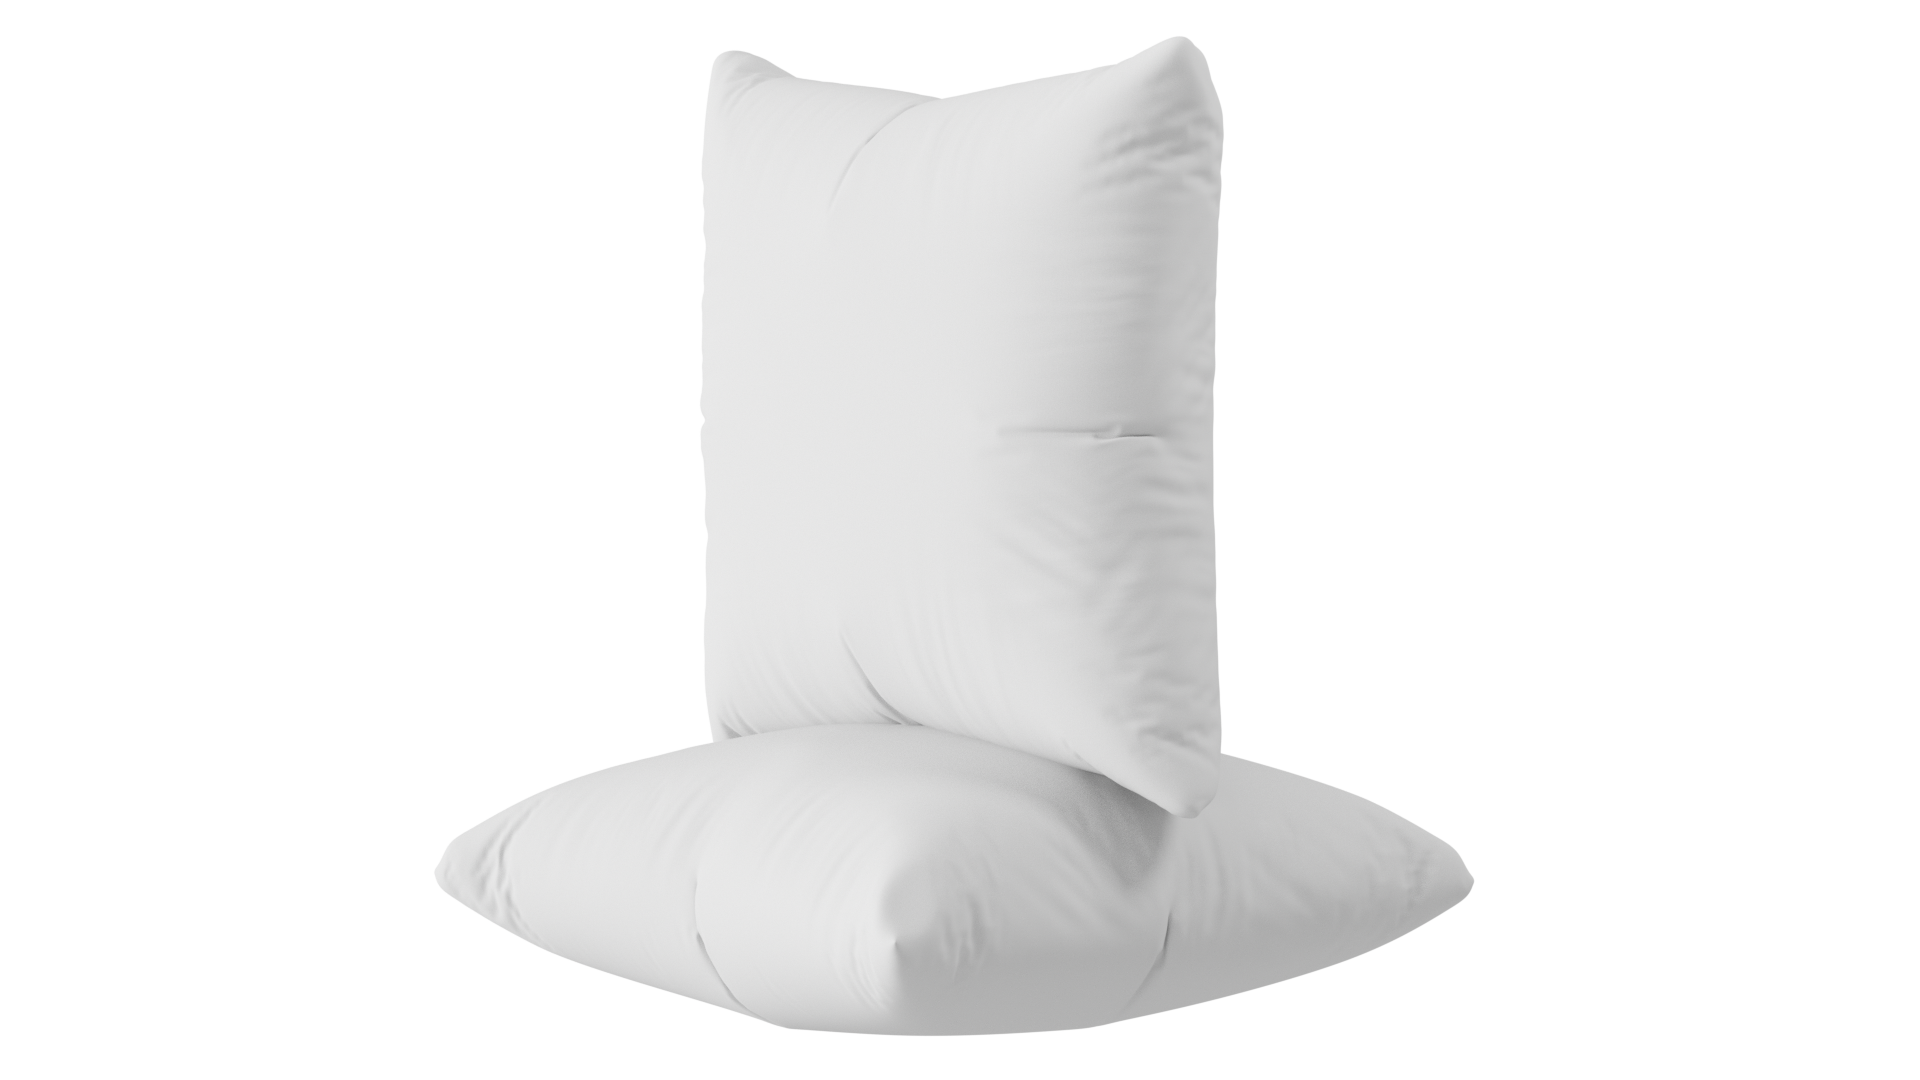 Utopia Bedding Throw Pillows Insert (Pack of 2, White) - 28 x 28 Inches Bed  and